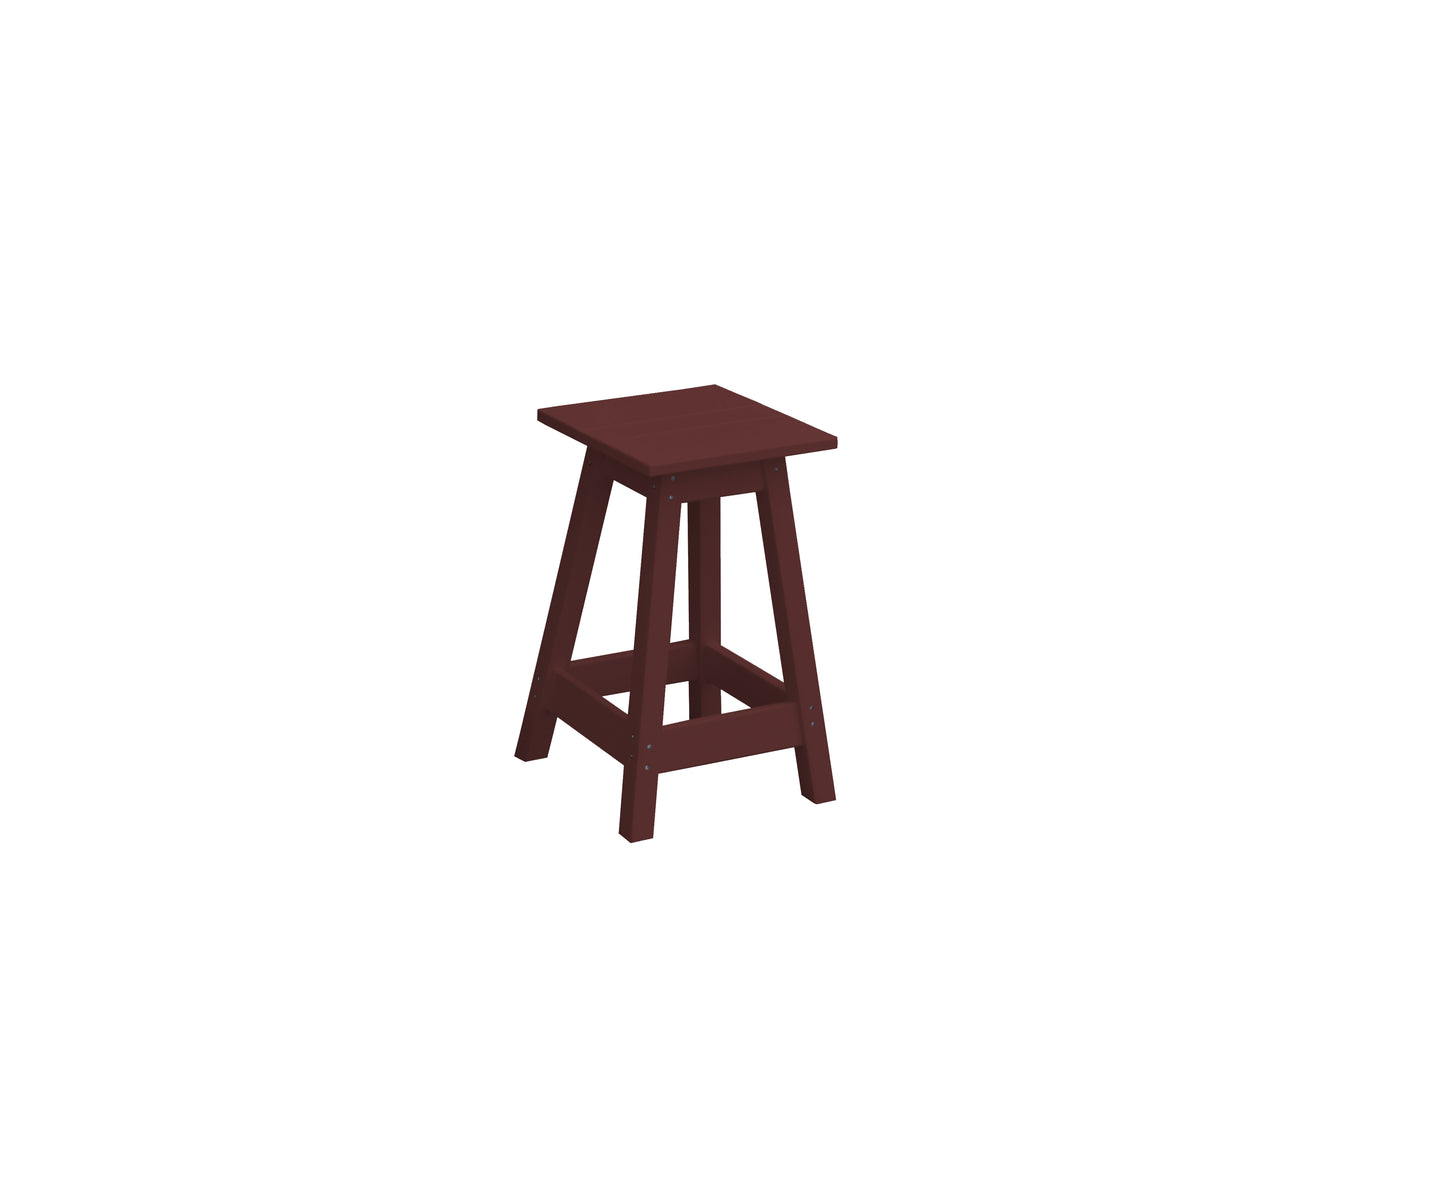 A&L Furniture Co. Recycled Plastic Square Bistro Stool - LEAD TIME TO SHIP 10 BUSINESS DAYS